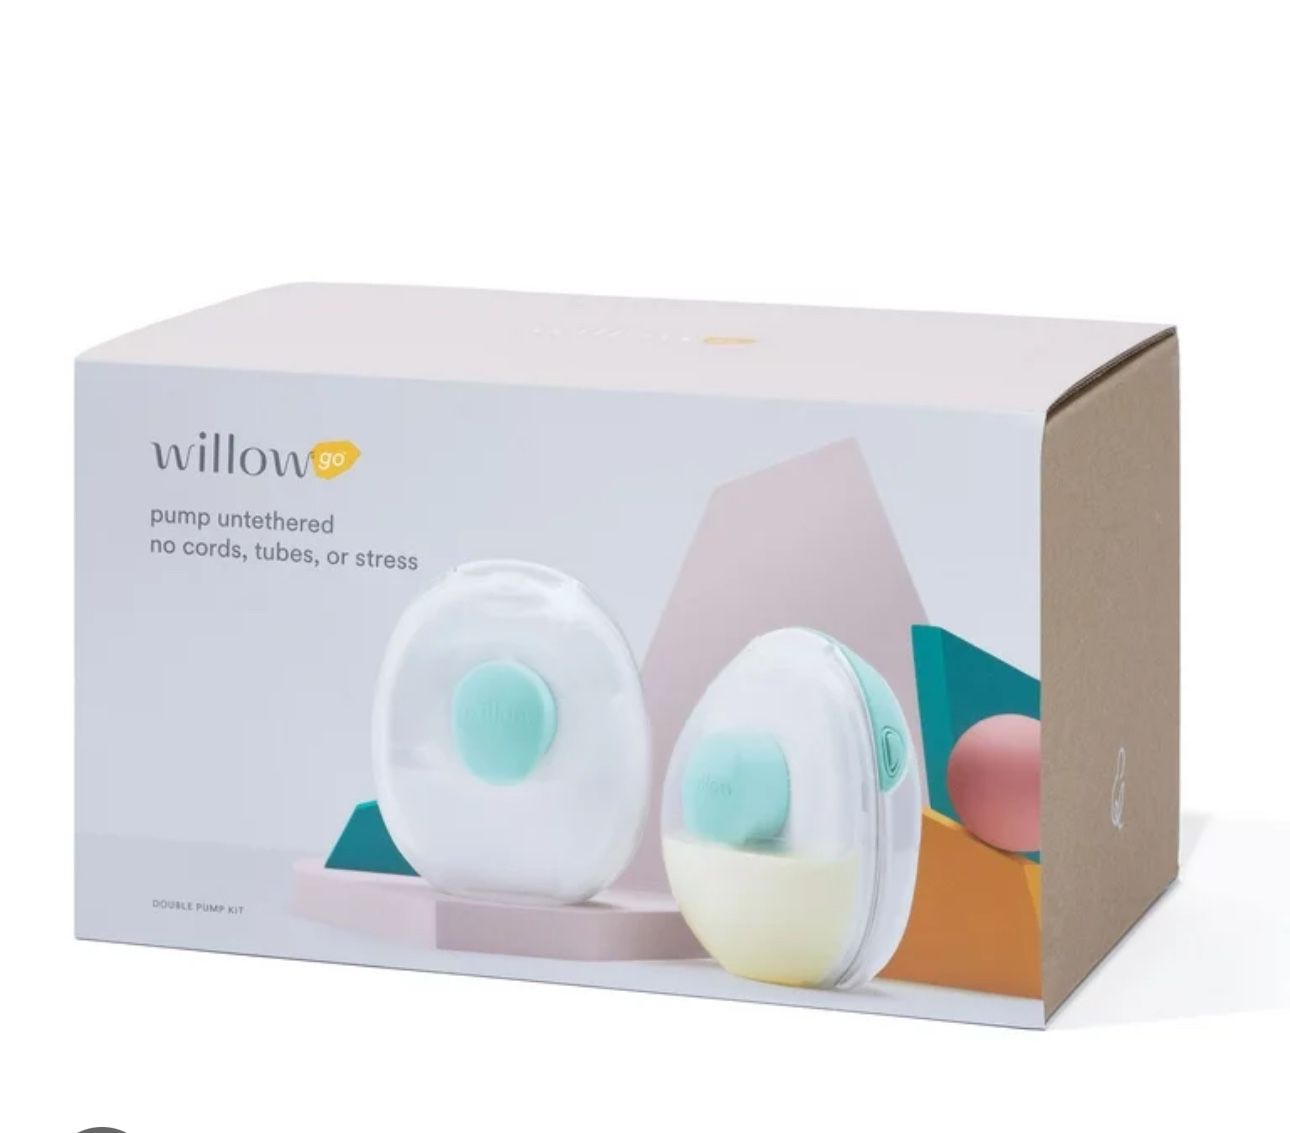 Breast Pump Willow 